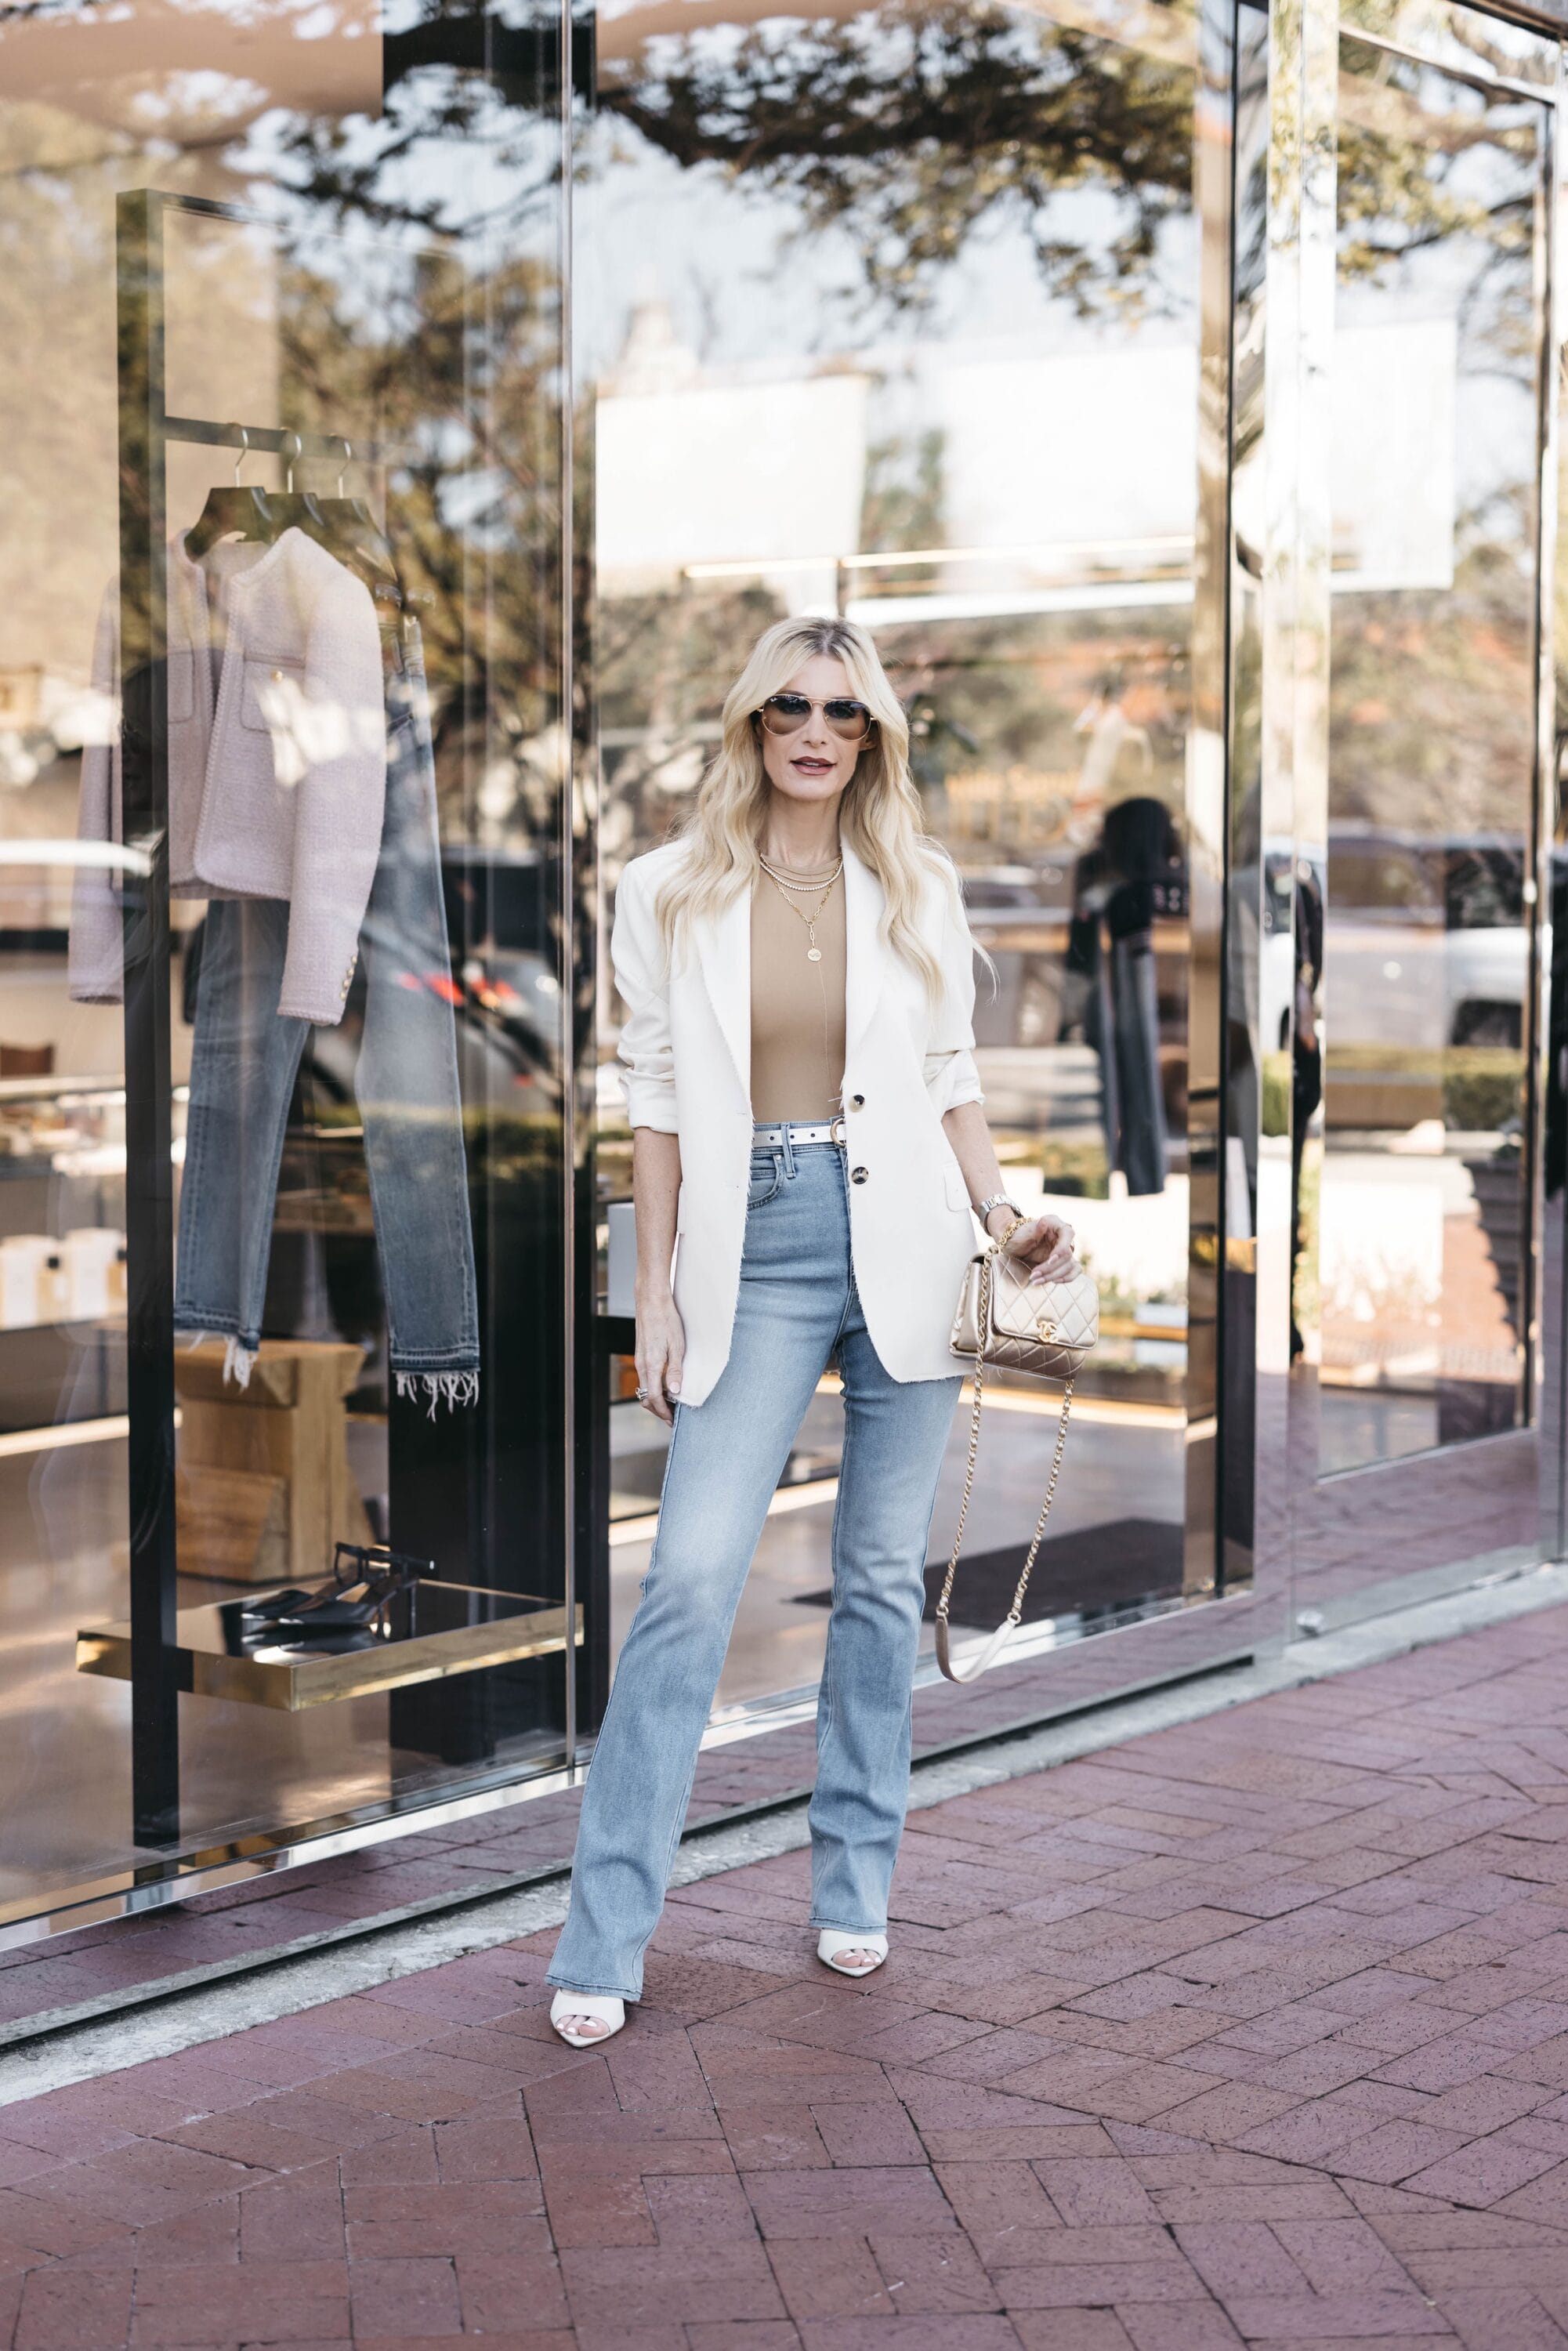 One Outfit Formula That Works Every Time Styled 3 Ways - So Heather